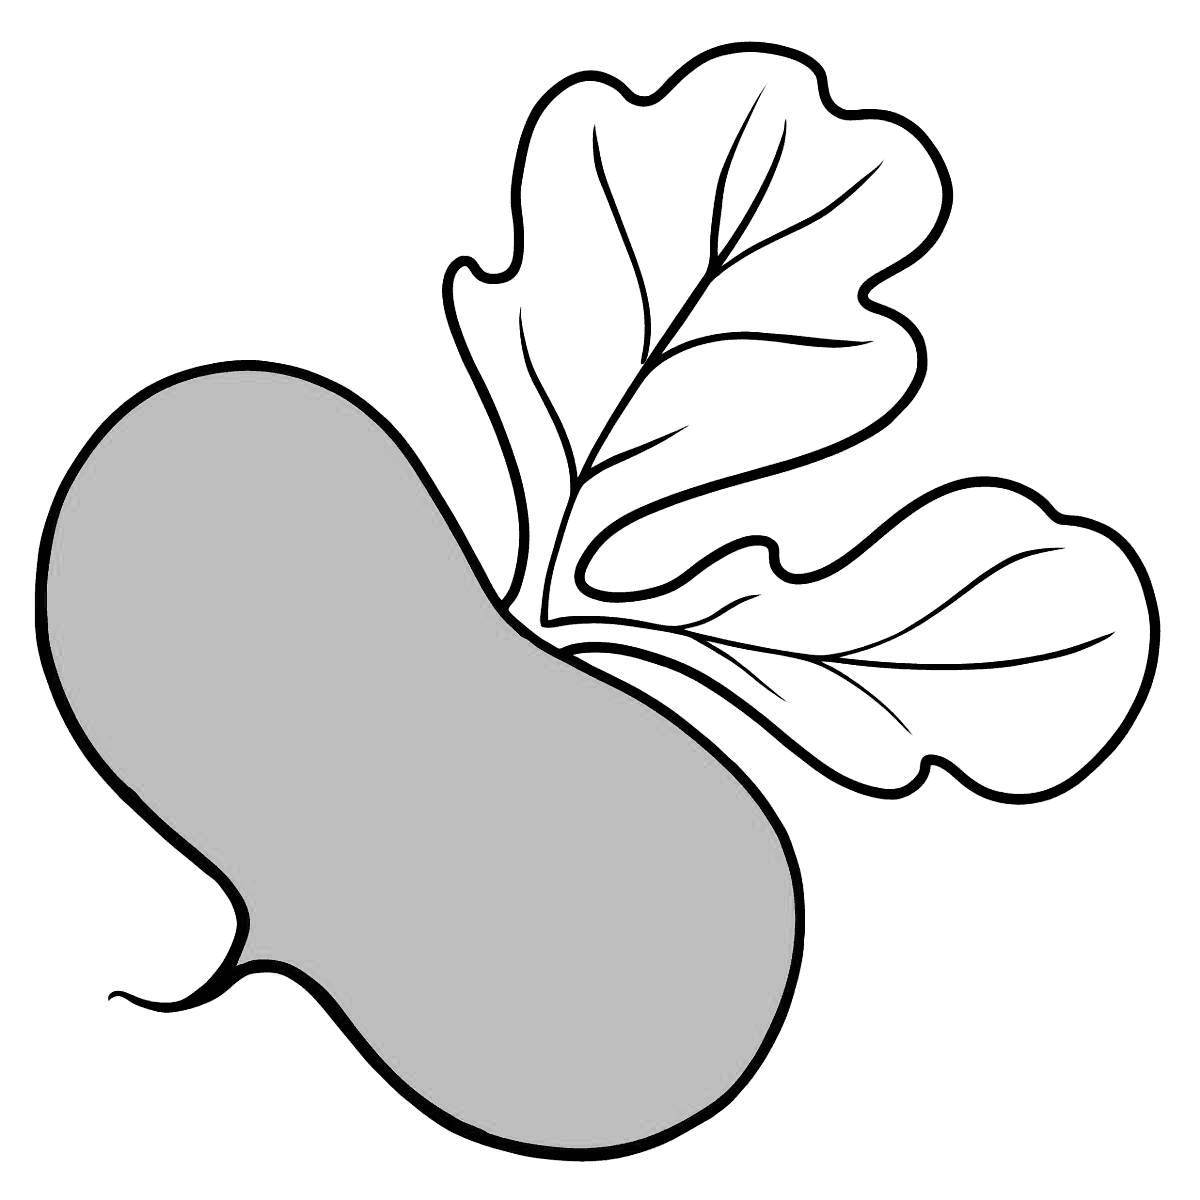 Lovely turnip coloring page for preschoolers